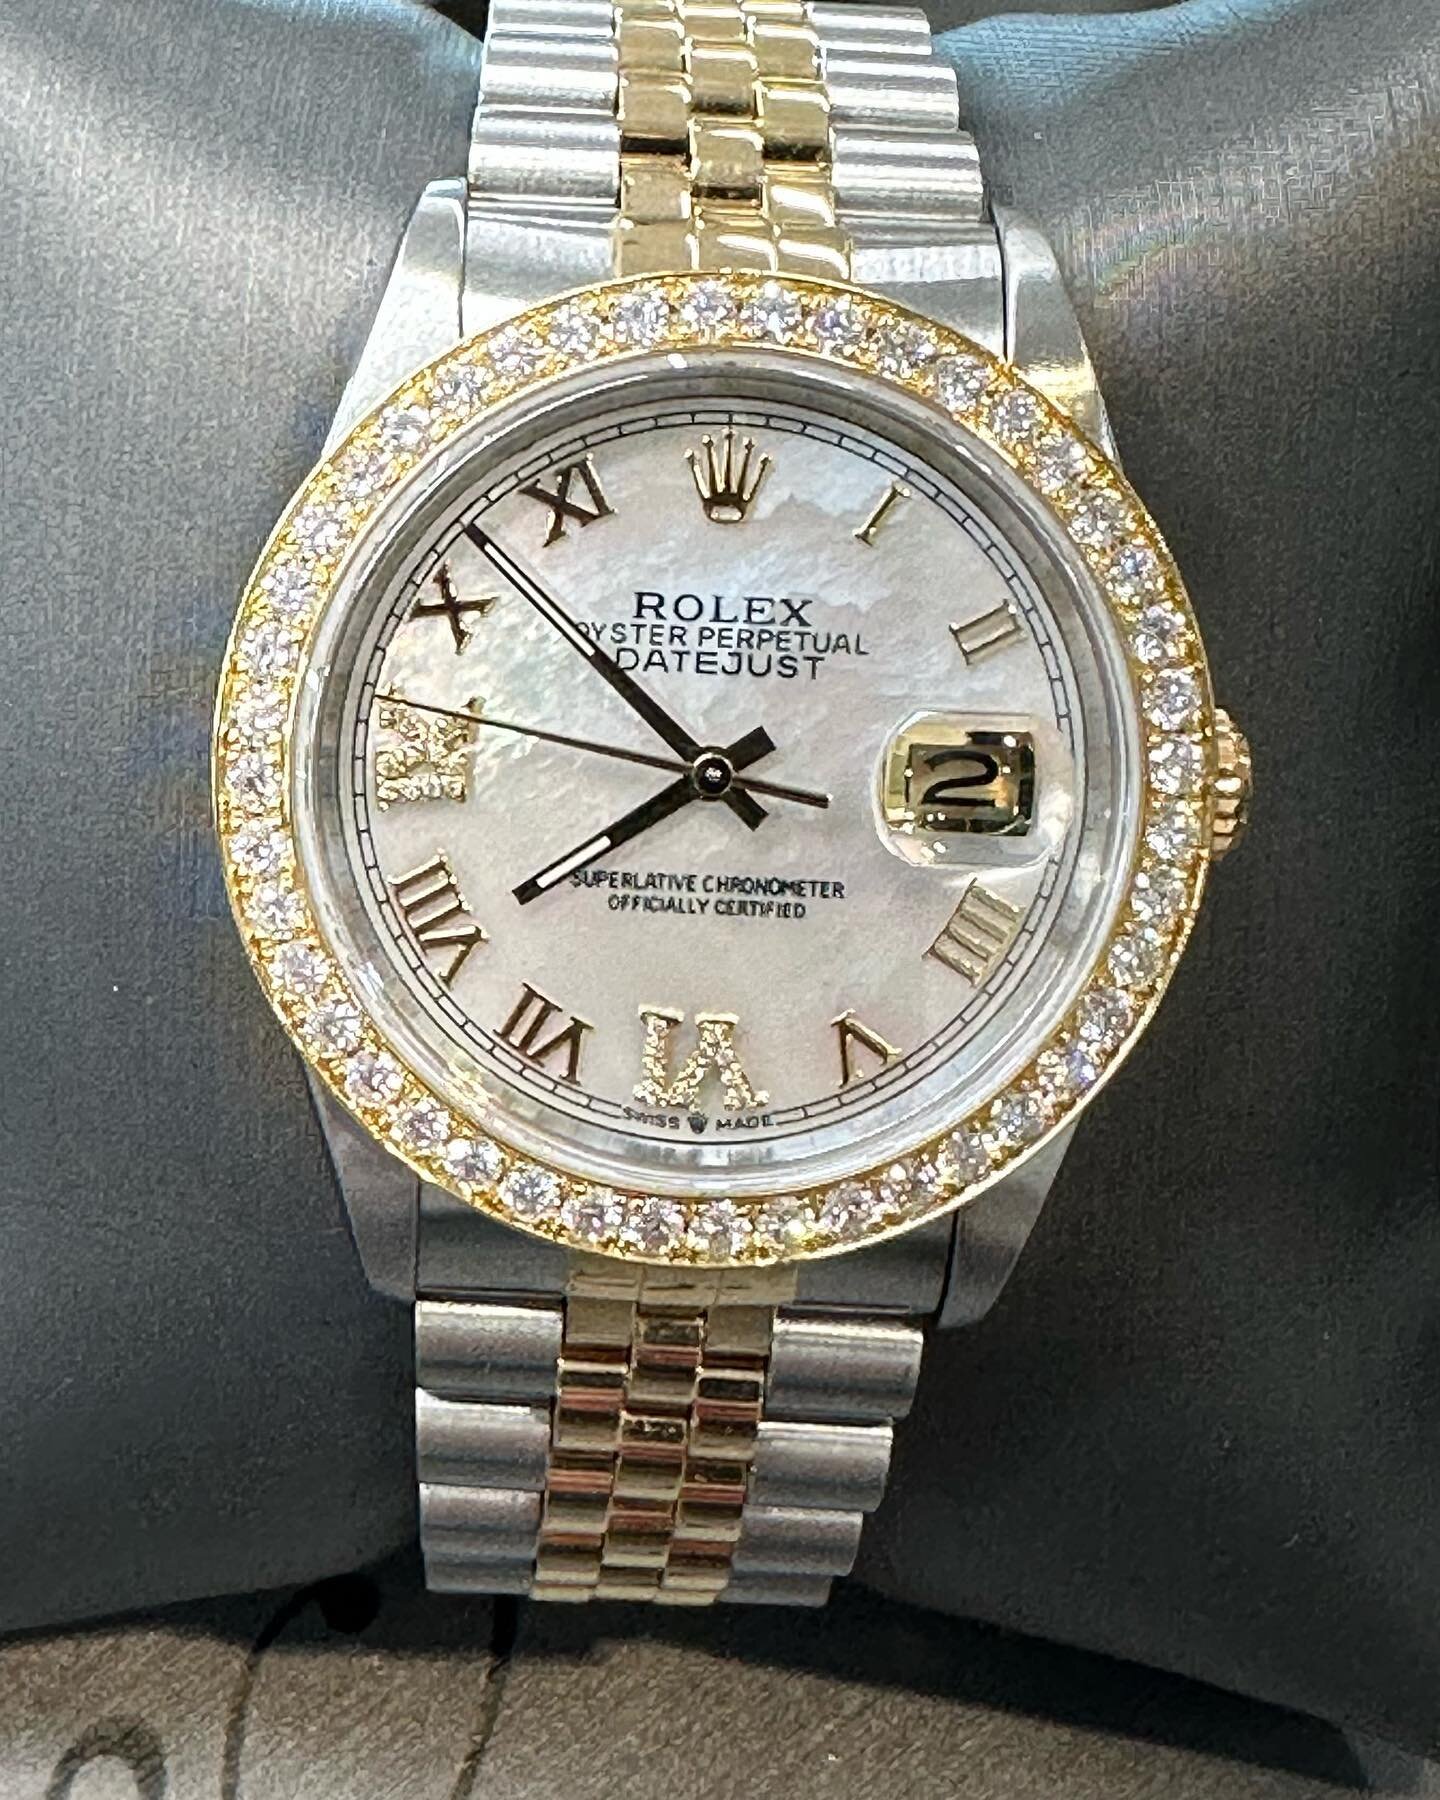 This custom diamond Rolex Datejust went to a very special lady this Mothers Day! Come in today to see our selection or let us build you something custom. 

#rolexdatejust #preowned #watch #diamondwatch #designyourown #customrolex #bling #eagleidaho #